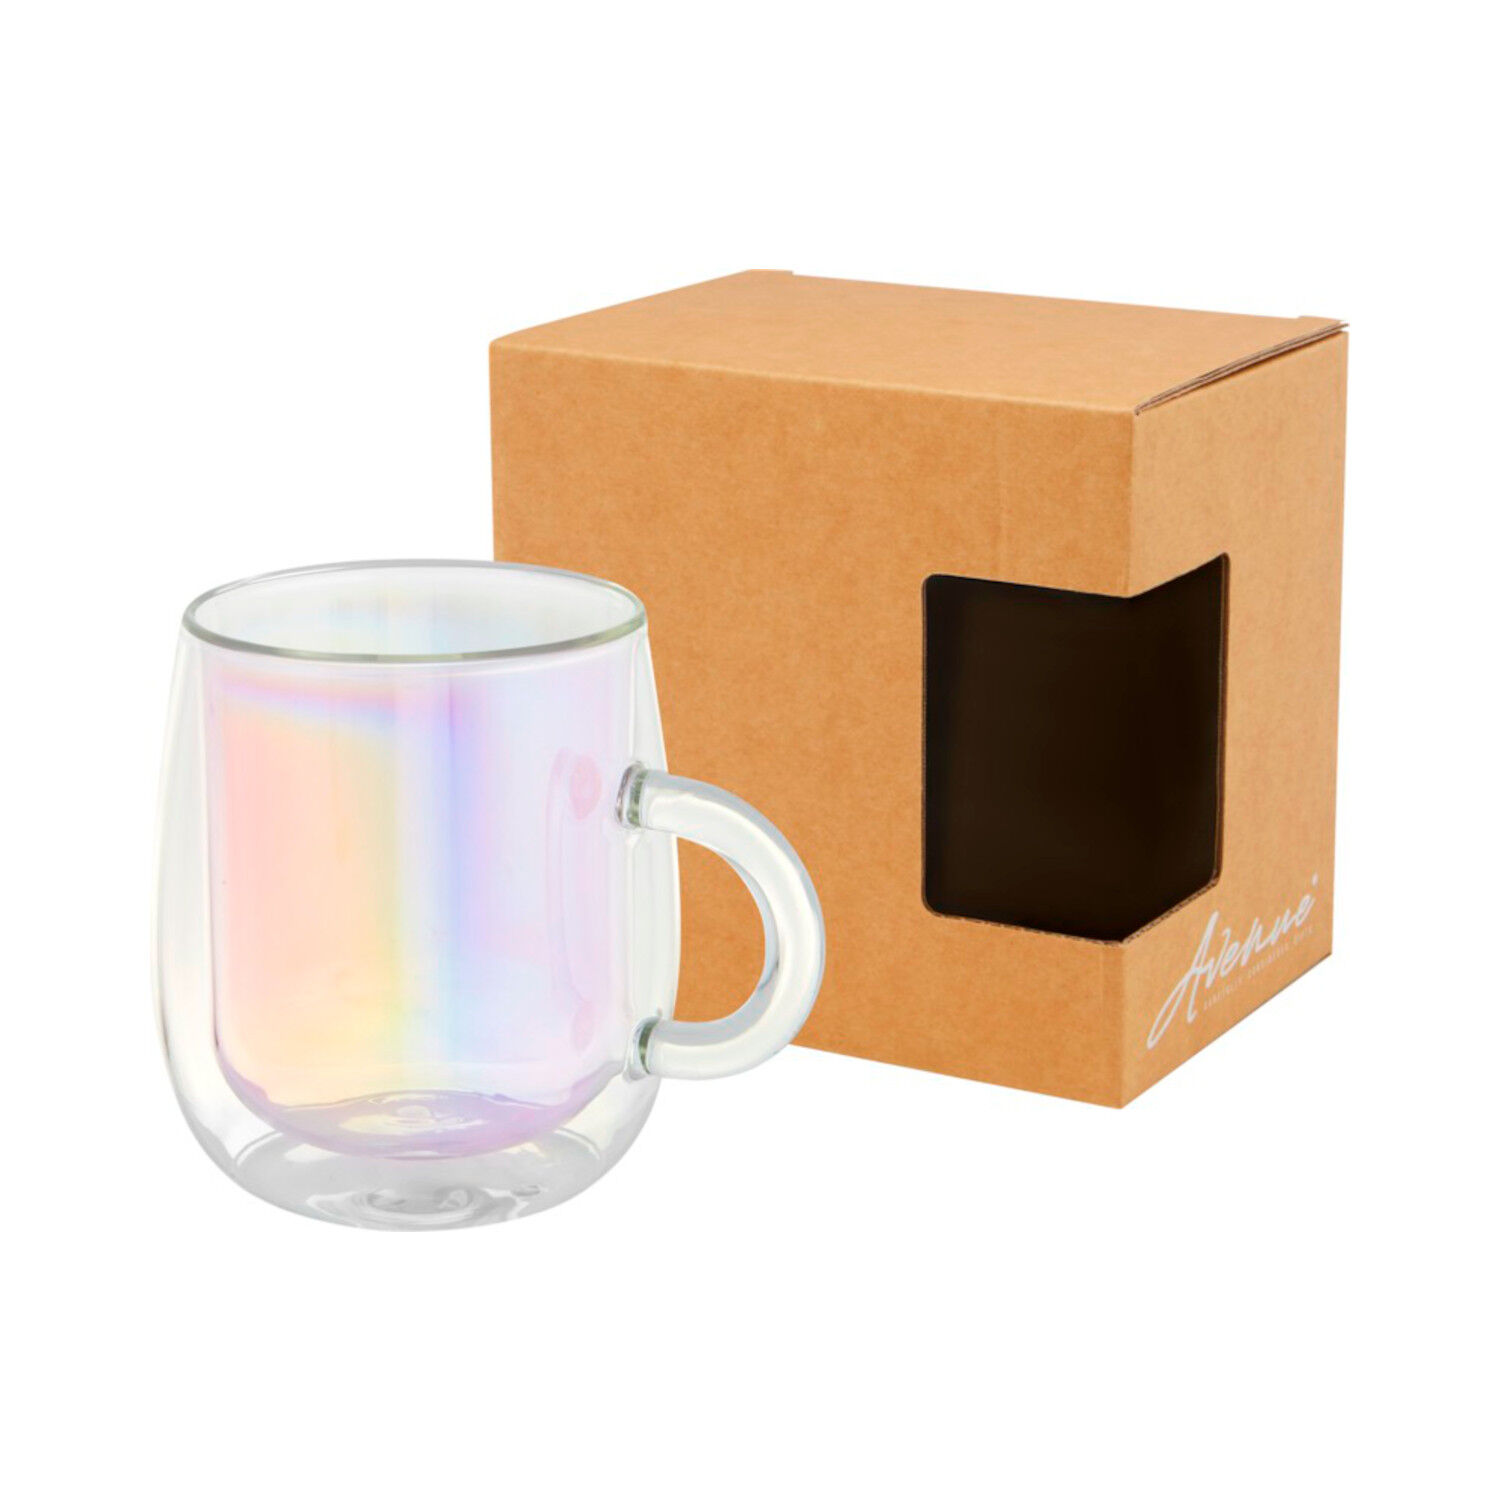 Double Wall Thermal Glass Mug (with packaging)